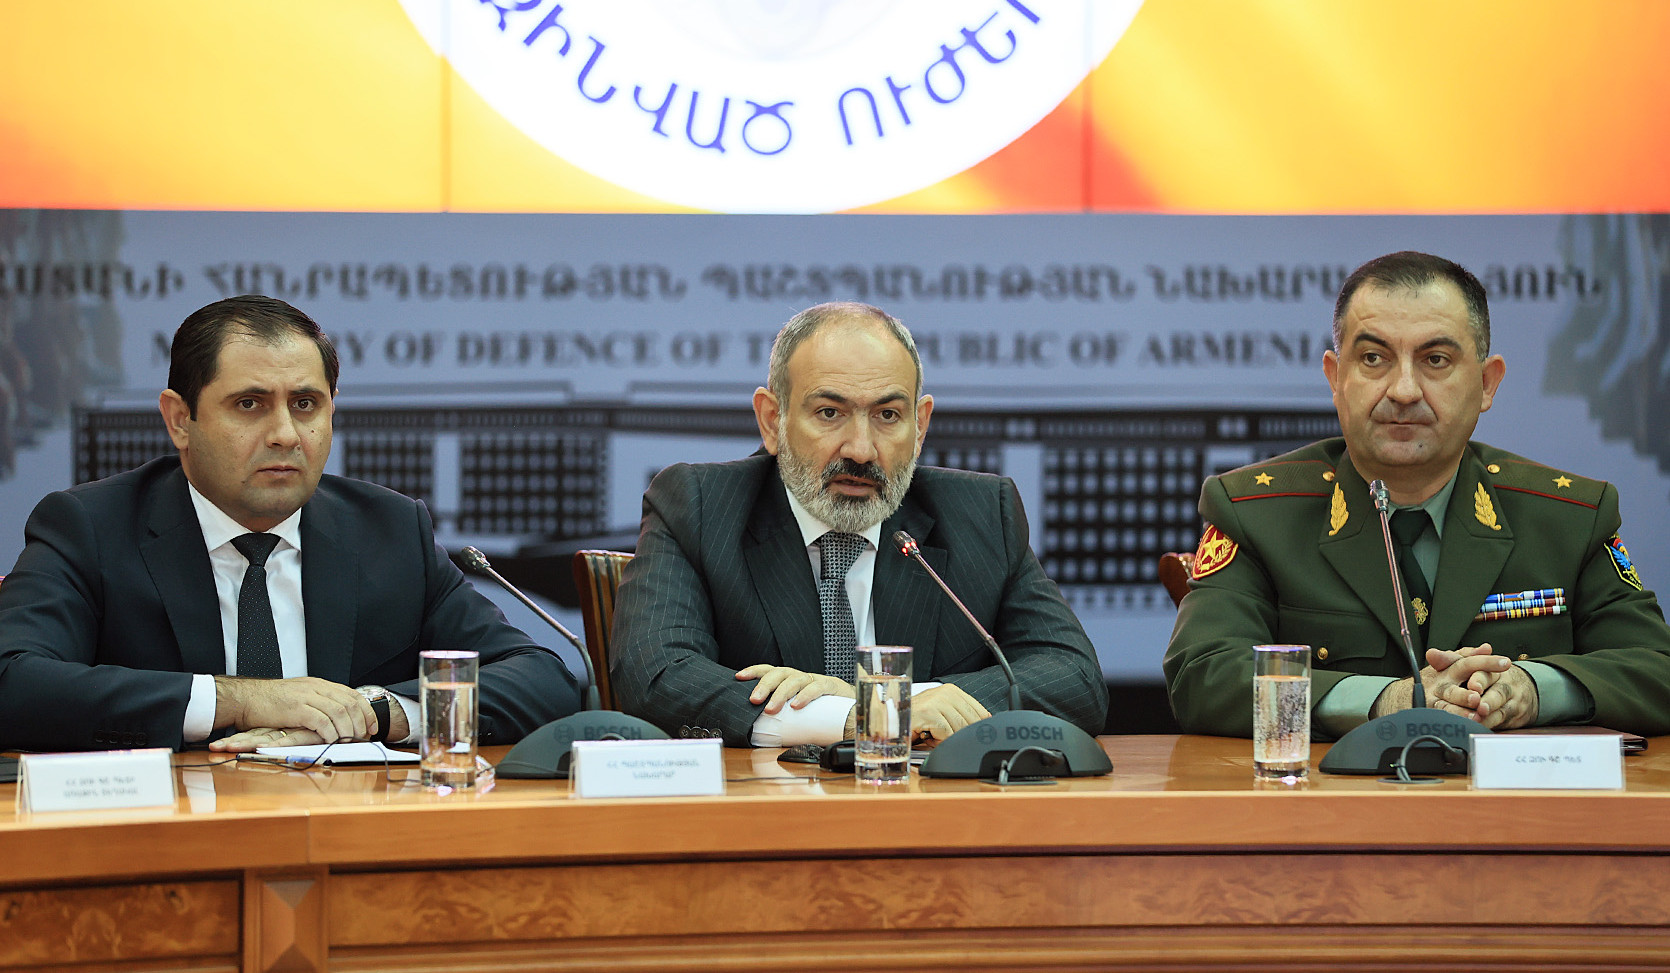 Prime Minister Pashinyan introduced newly appointed Chief of General Staff of Armed Forces Edvard Asryan to top officers of Armed Forces